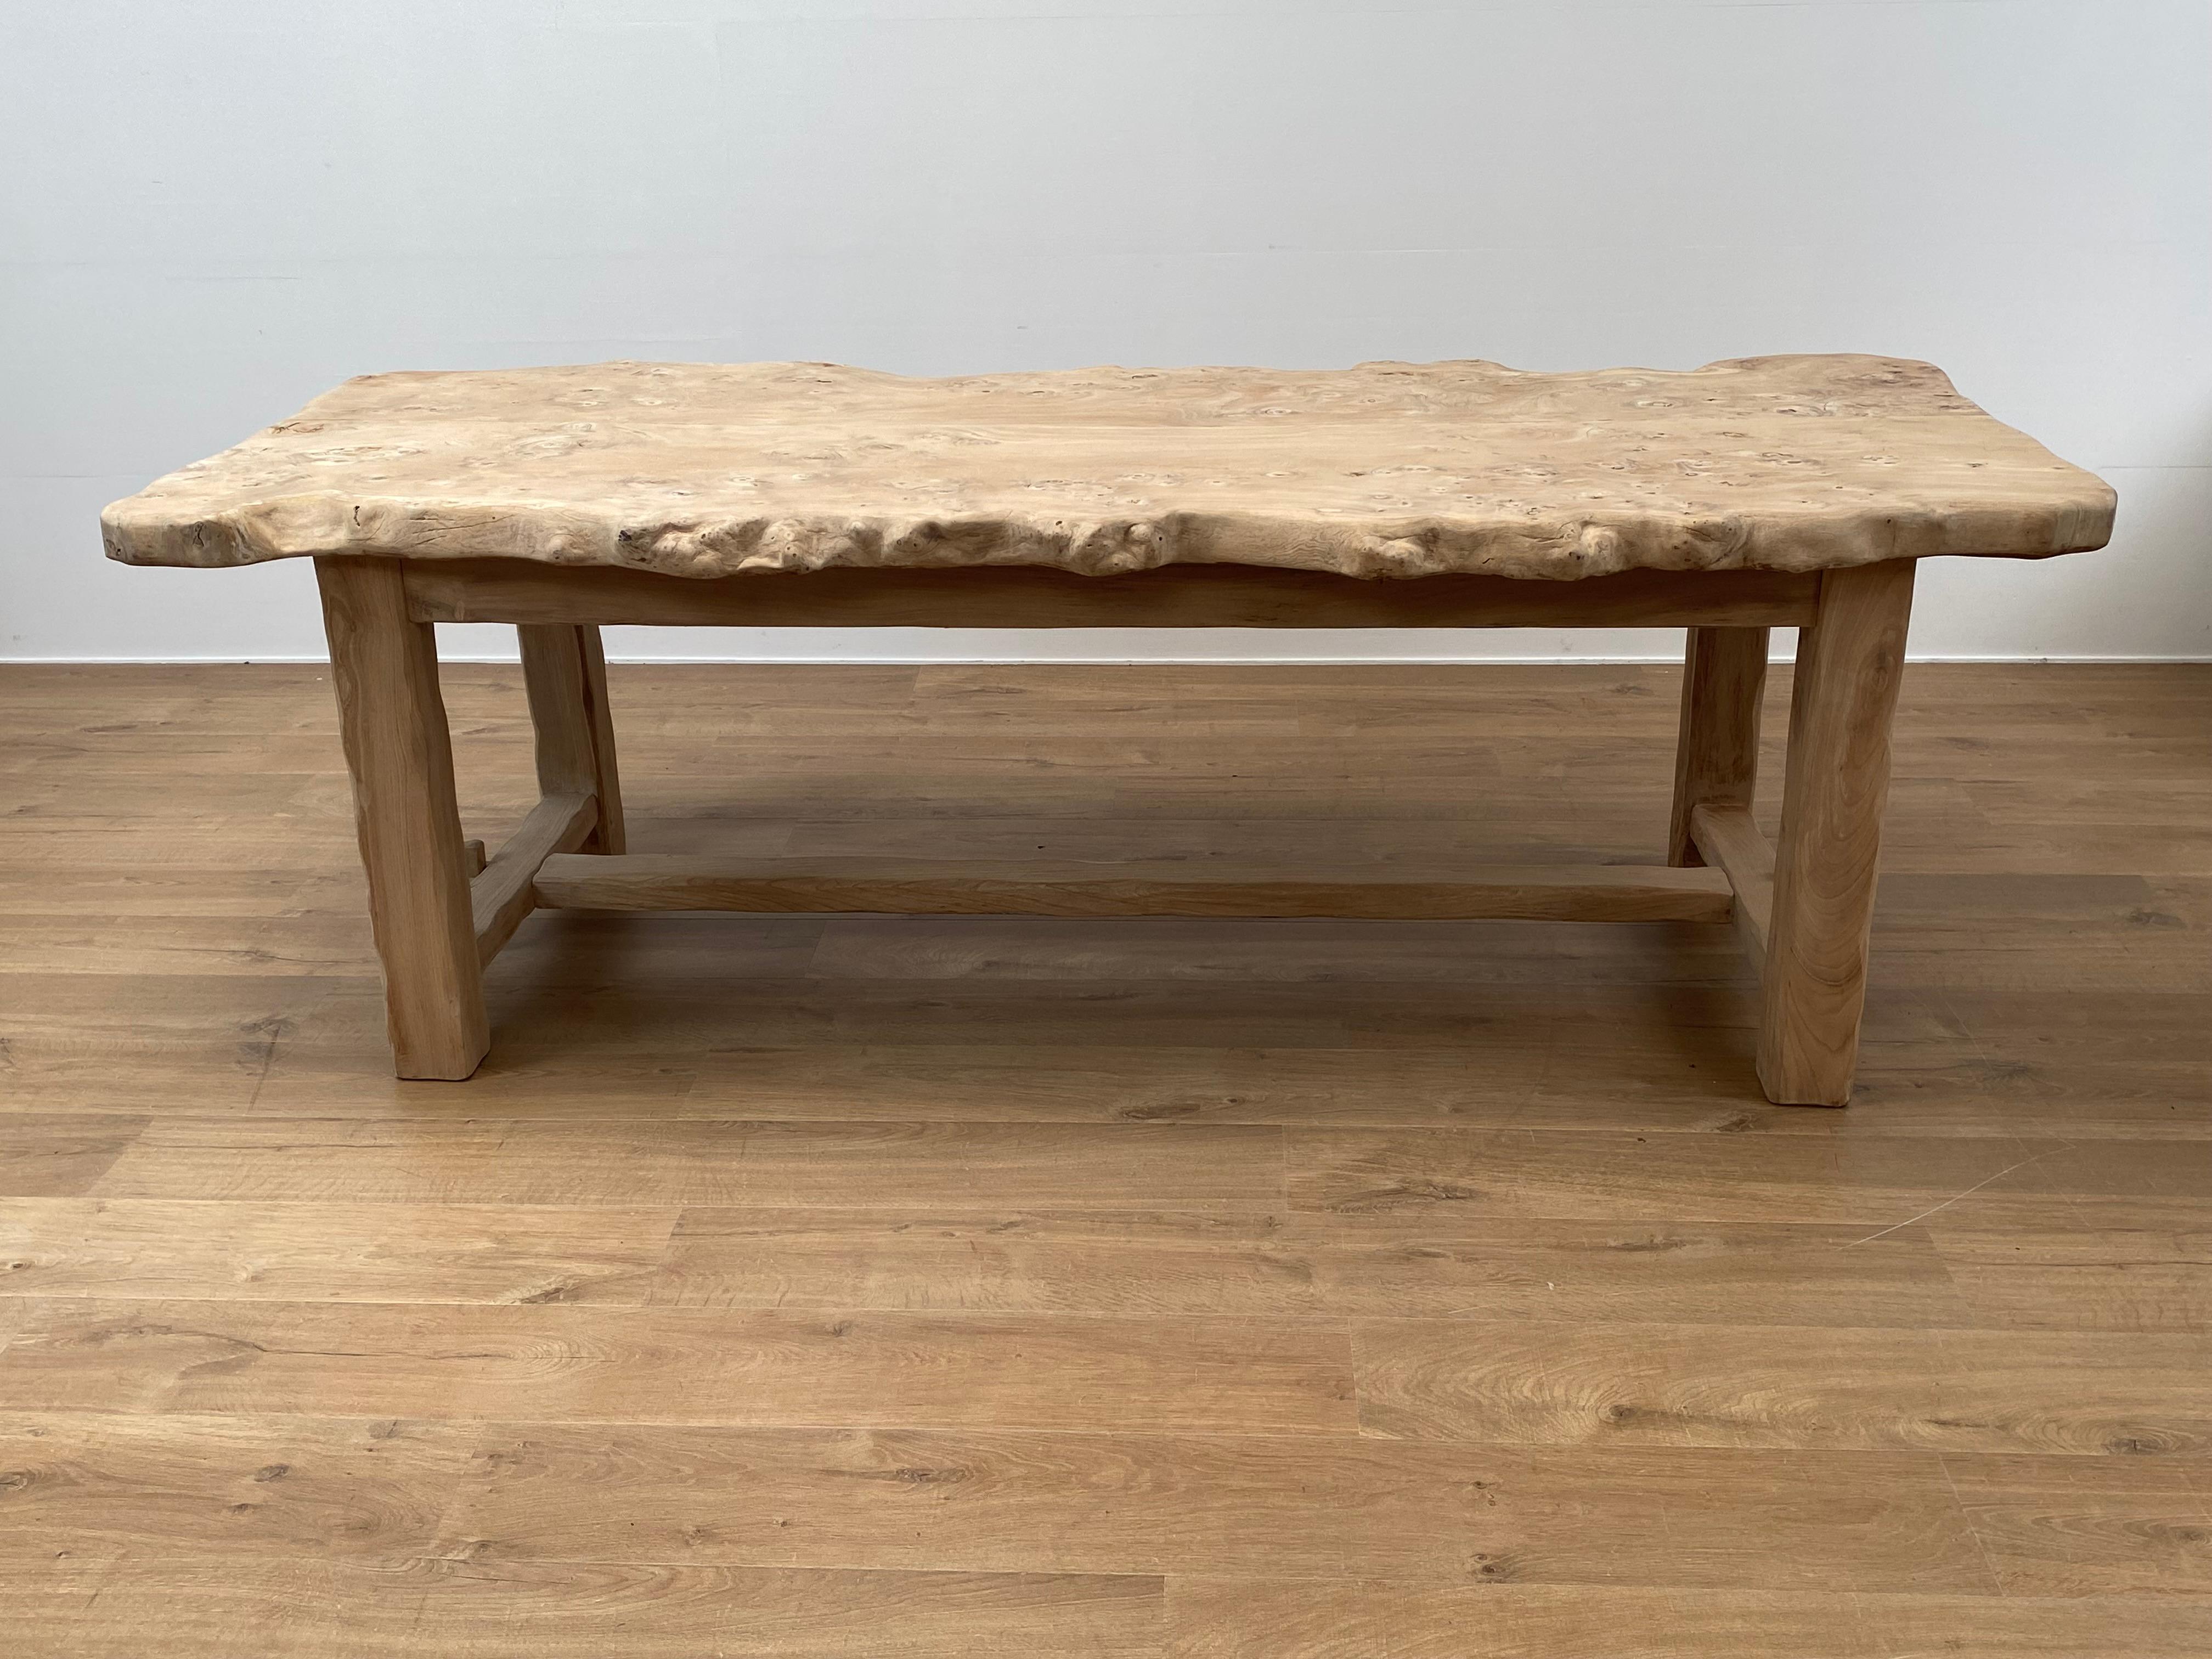 Exceptional Brutalist table in a bleached Elmwood,from France from the 1960 ies,
beautiful patina and shine of the Rootwood,
irregular and natural form of the table top,
the table stands on 4 legs with stretcher,
very powerful piece of